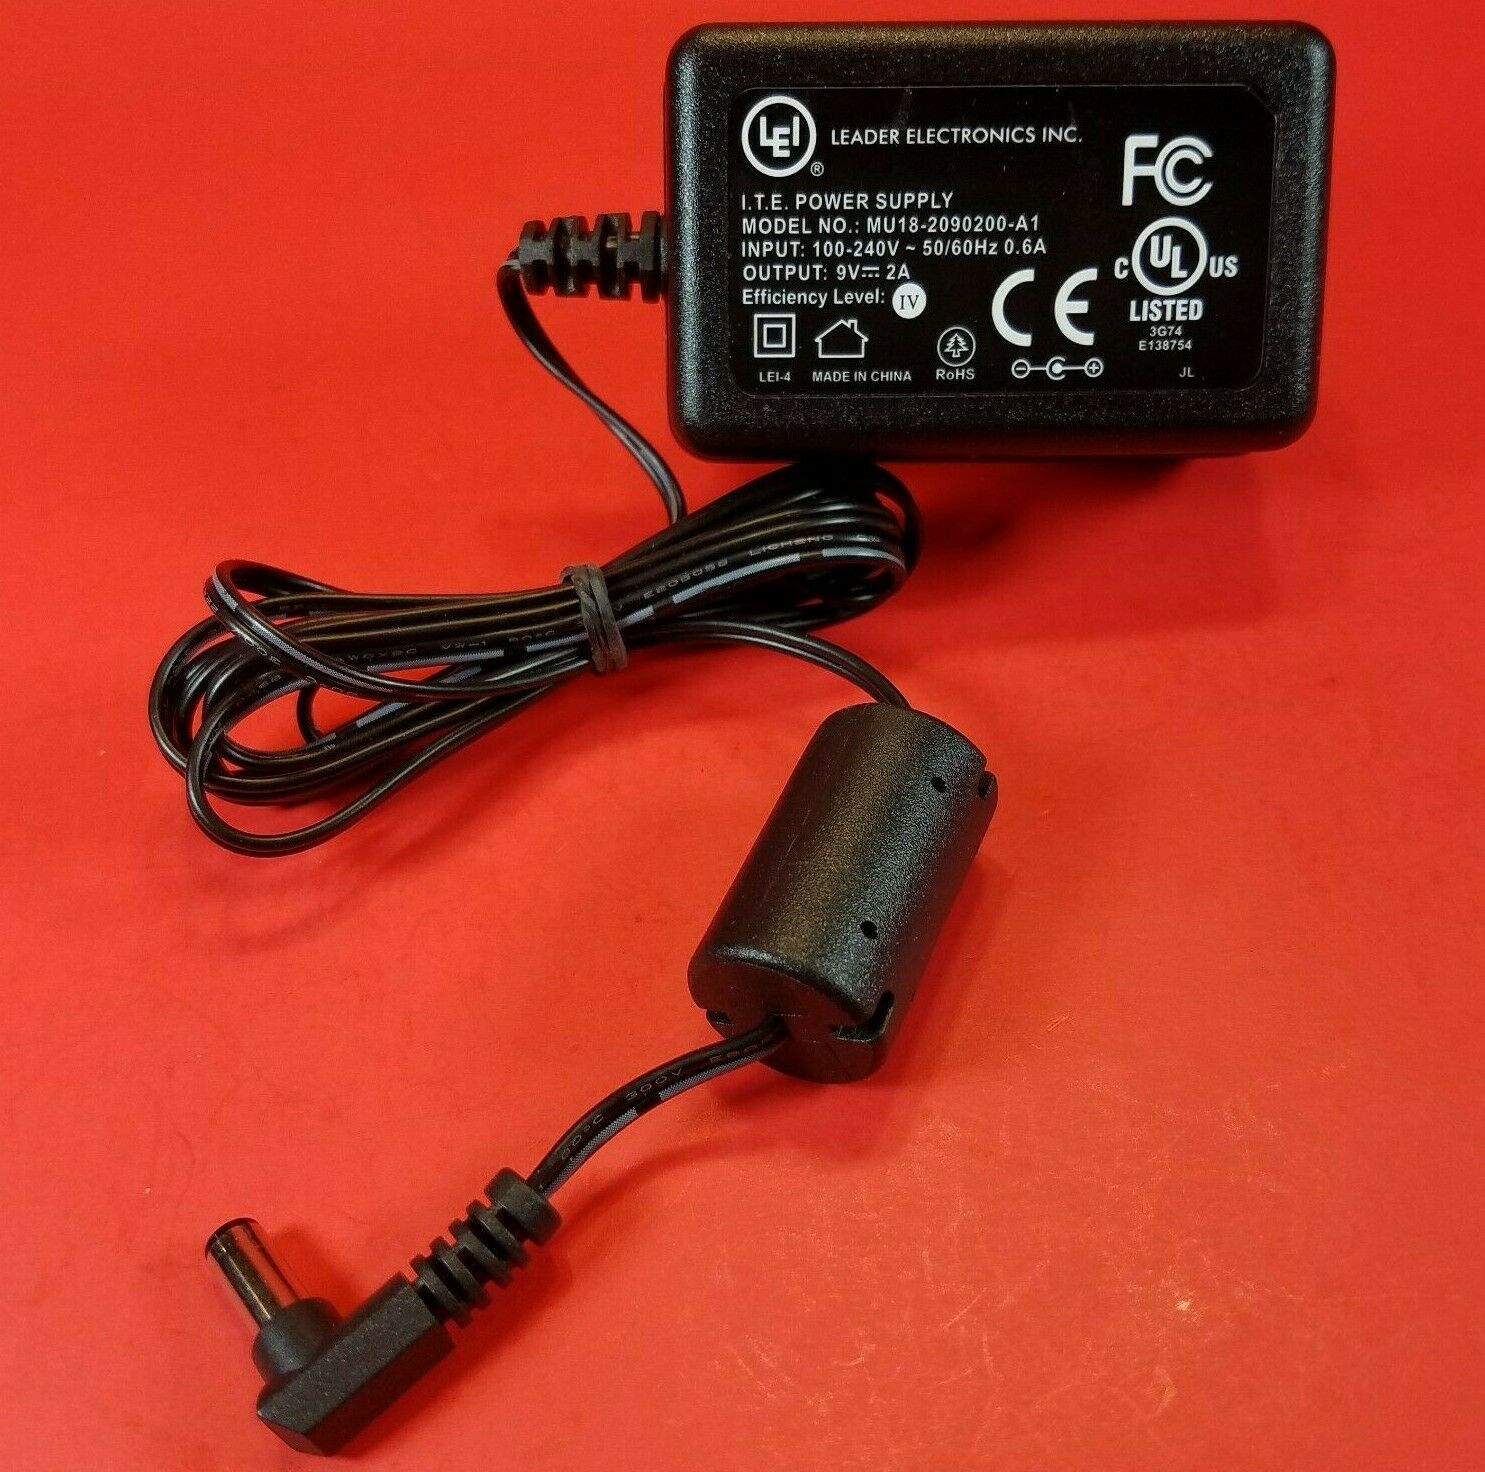 Leader Electronics 9V DC - 2A AC/DC Adapter I.T.E. Power Supply MU18-2090200-A1 Country/Region of Manufacture: China M